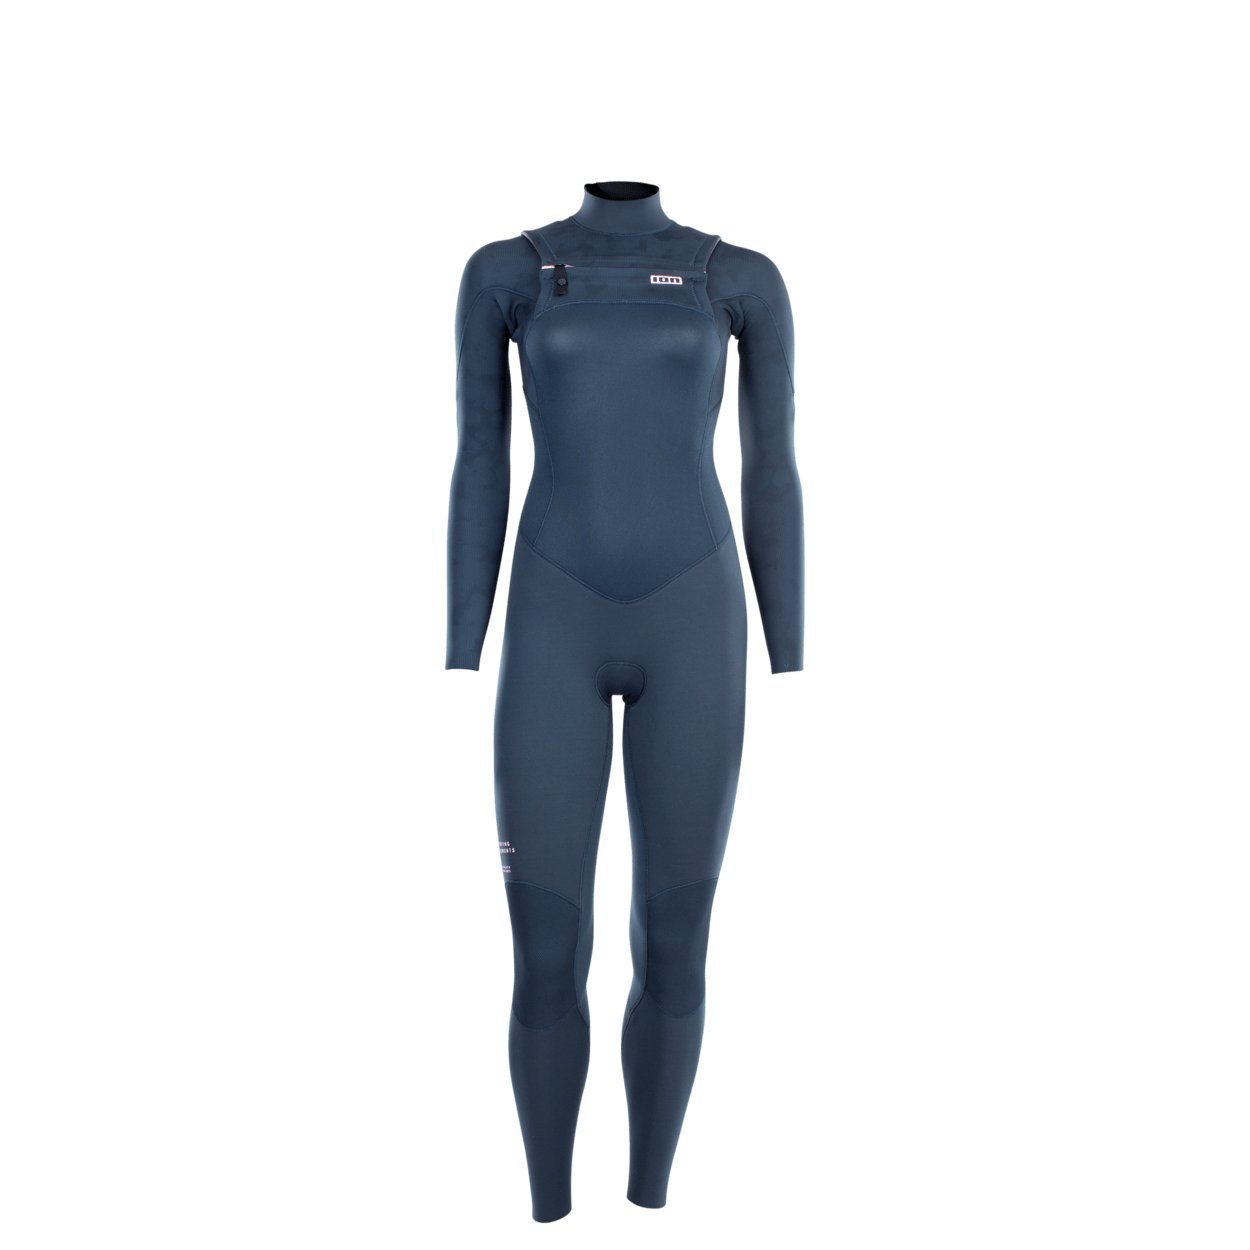 ION Element 3/2 Front Zip 2022 - Worthing Watersports - 9008415953028 - Wetsuits - ION Water